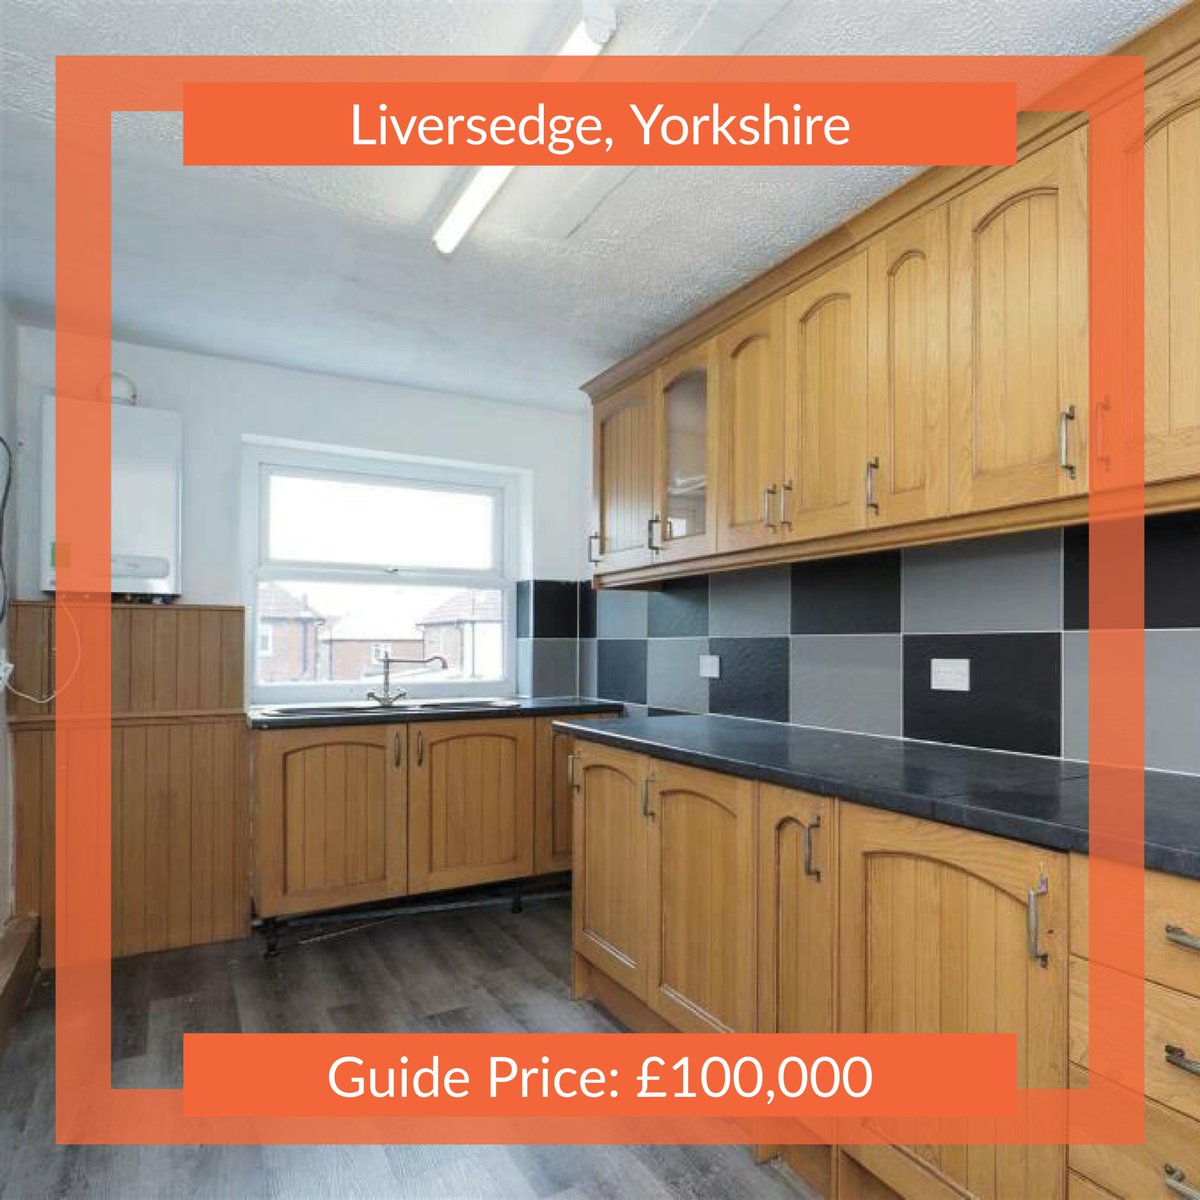 NEW LISTING in #Liversedge #Yorkshire
Guide: £100,000
Auction: 28/06/23
Website: whoobid.co.uk/accueil/auctio…
#whoobid #propertyauction #houseauction #auction #property #buytolet #propertyinvestor #housingmarket #estateagent #quicksale #propertydeals #pricegrowth #mortgage #investment